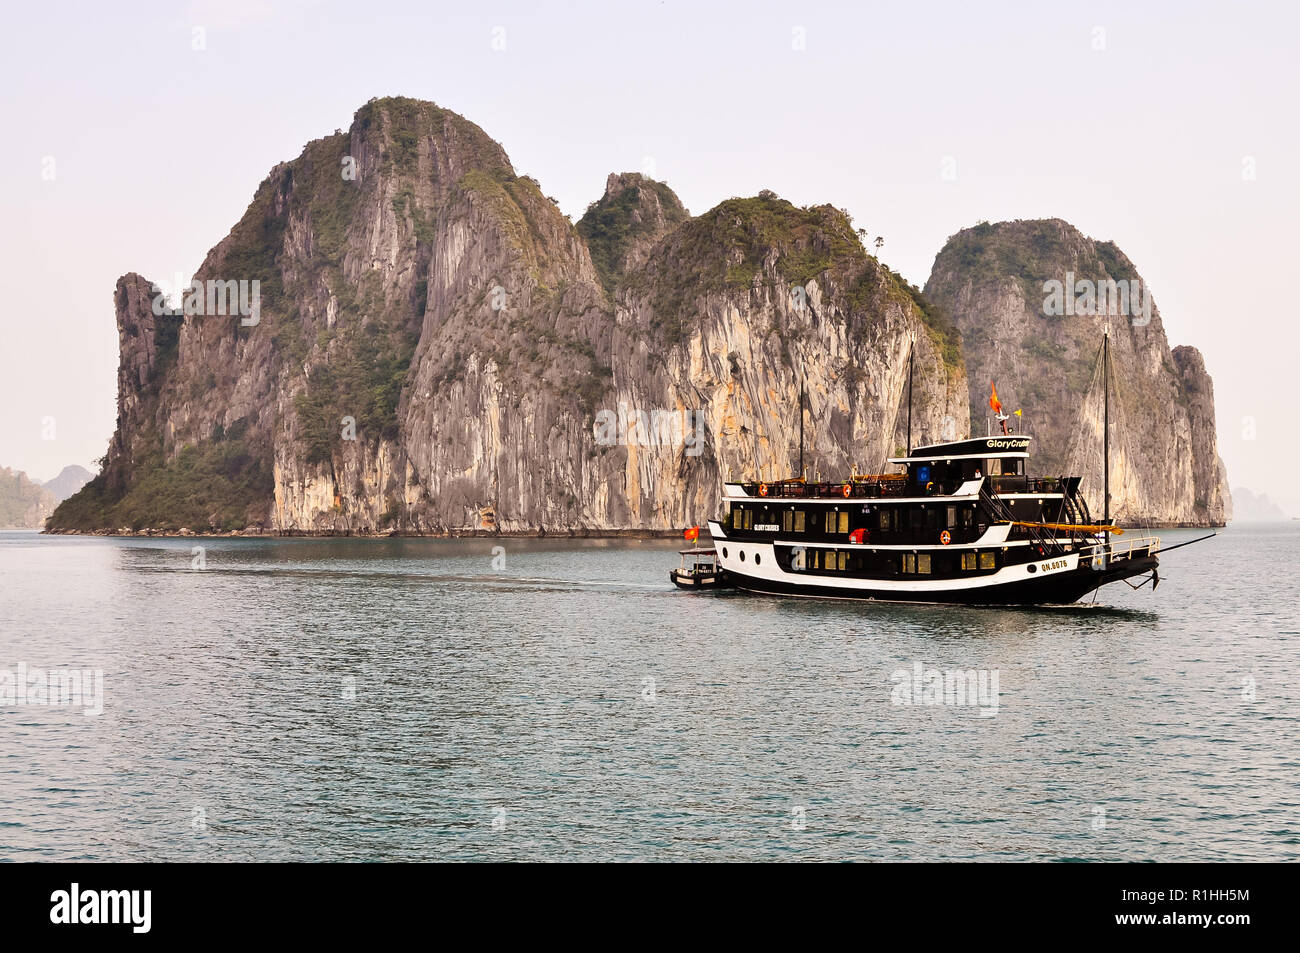 Boat and Limestone Formation in Halong Bay, Vietnam Stock Photo